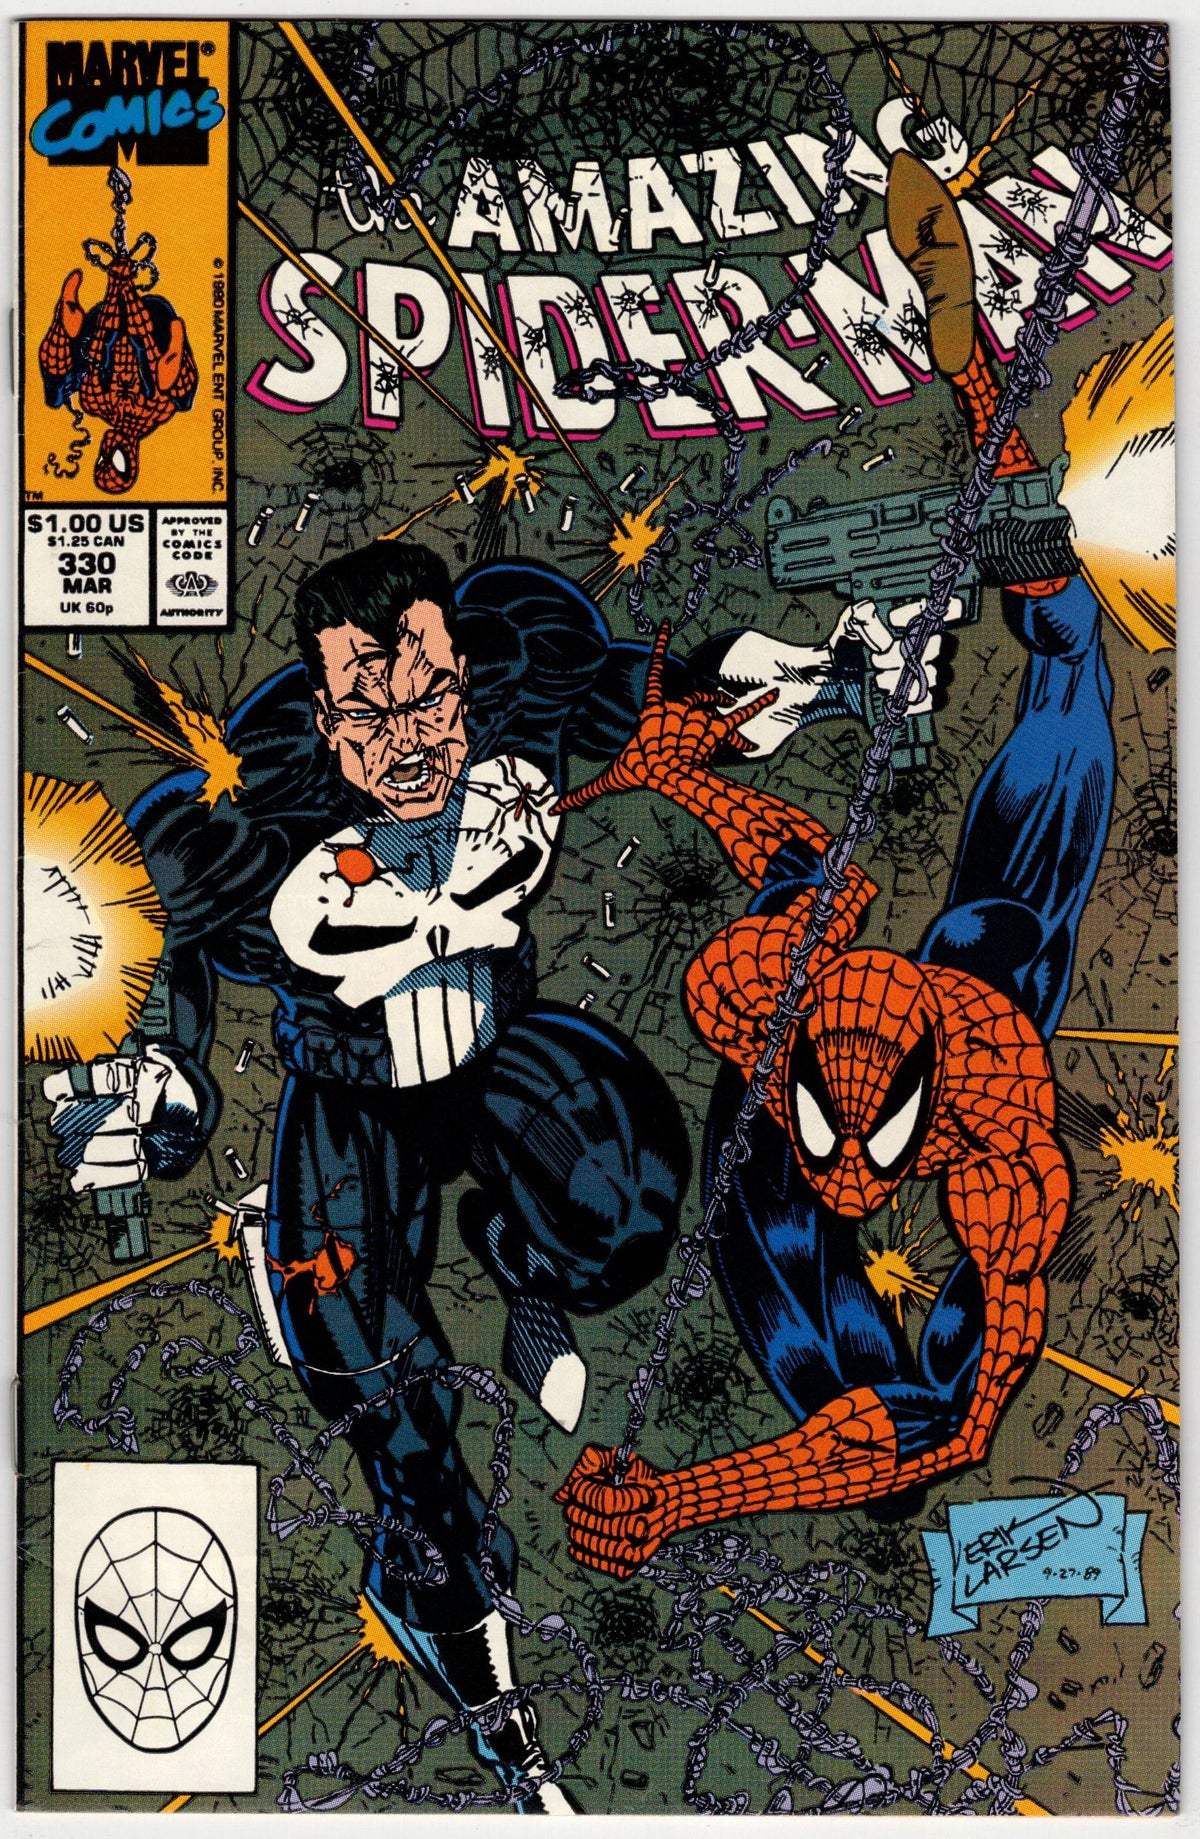 Photo of Amazing Spider-Man, Vol. 1 (1990) Issue 330 - Very Fine Comic sold by Stronghold Collectibles